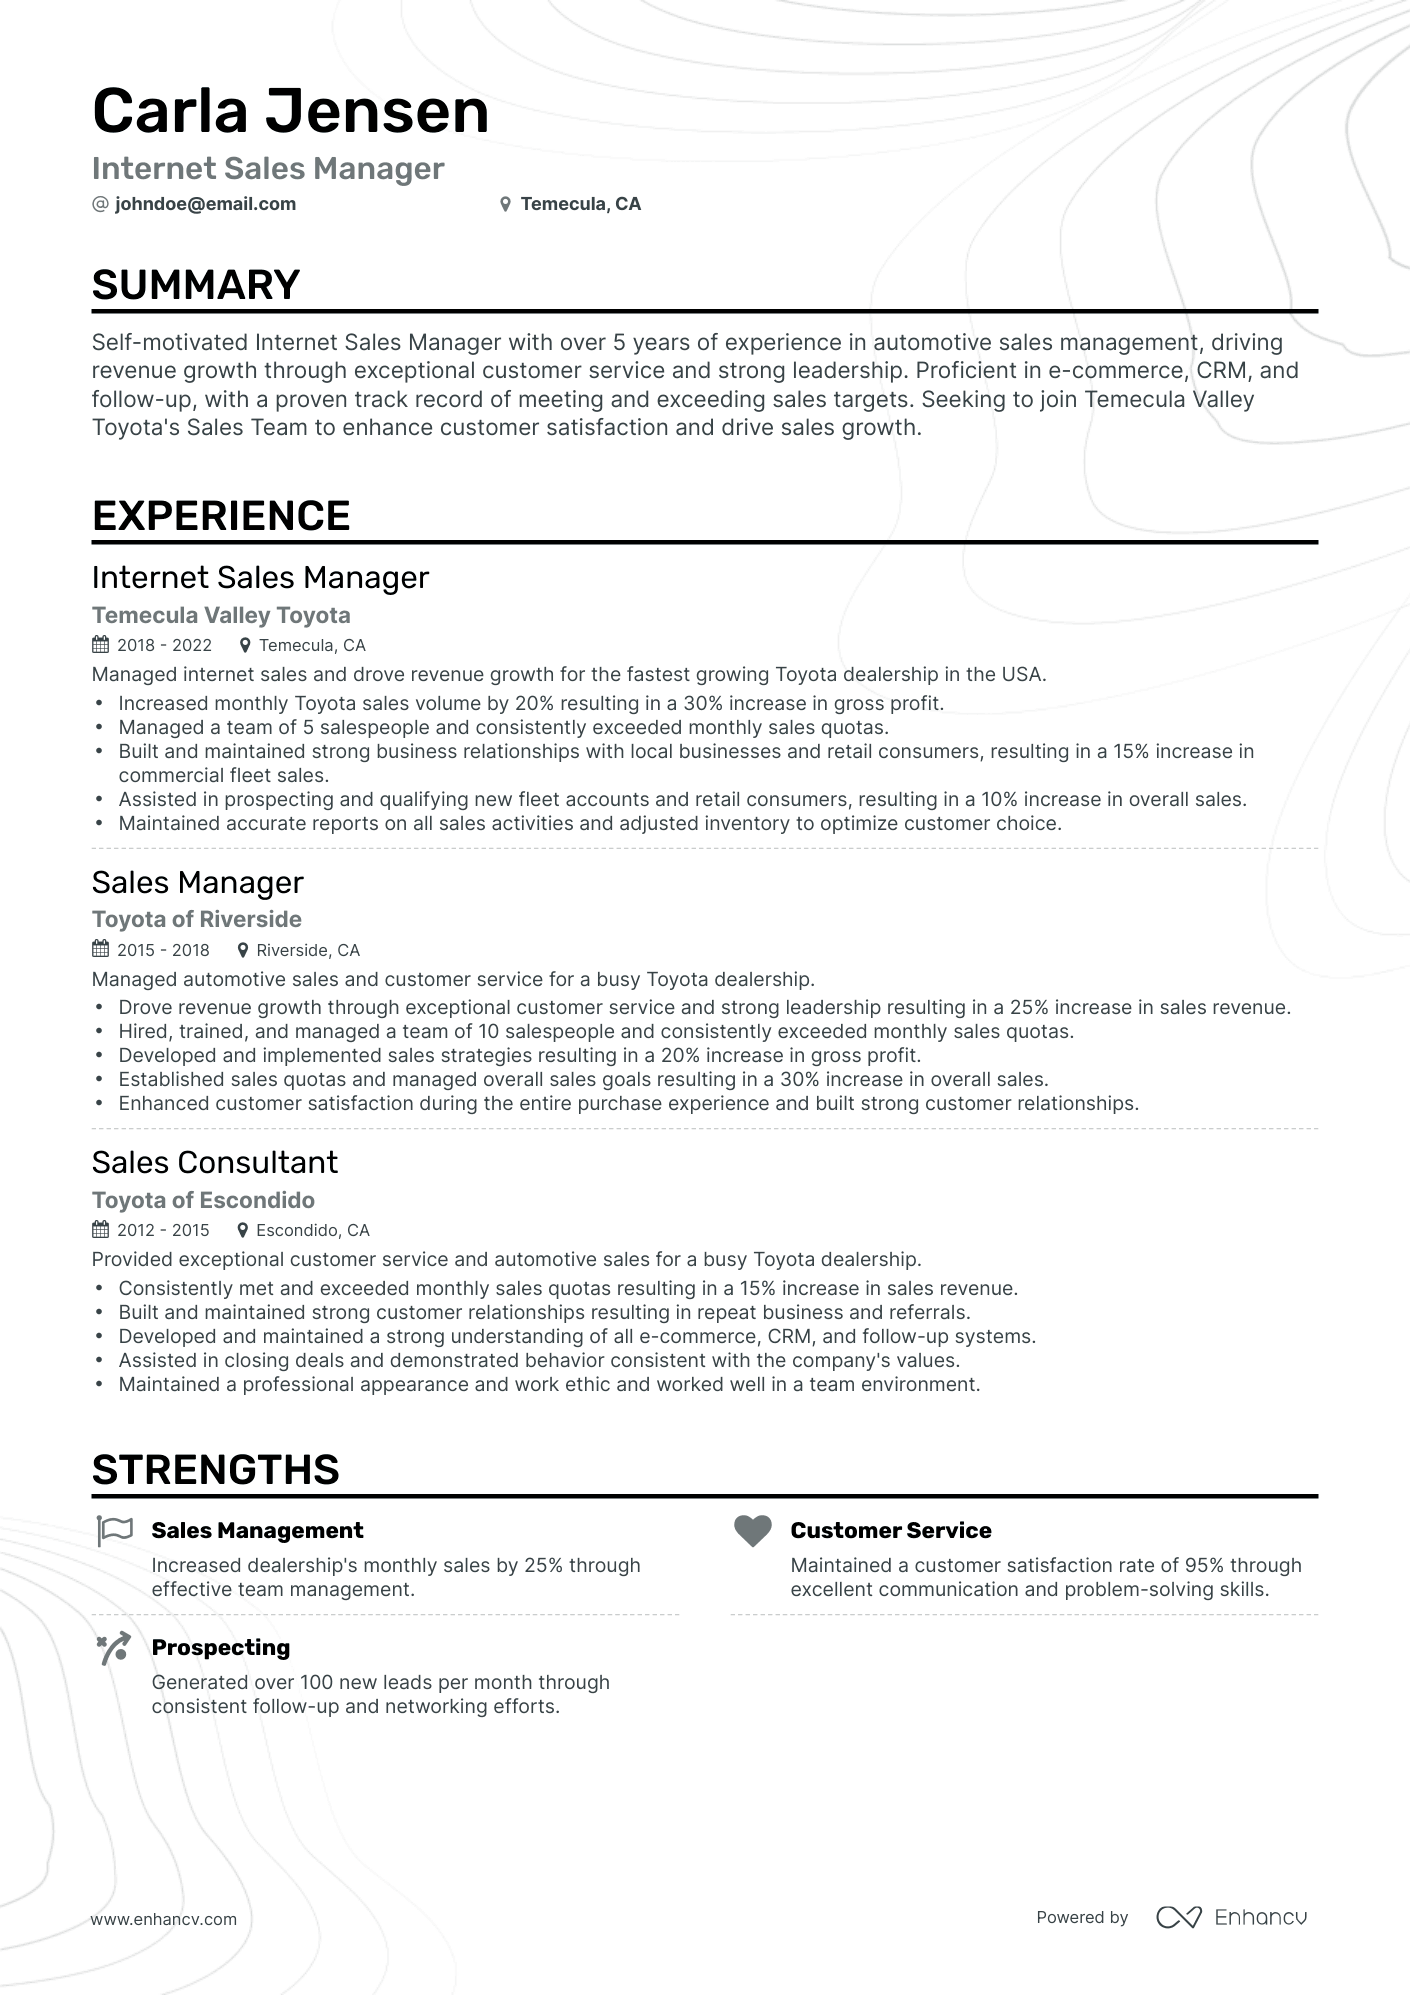 Classic Internet Sales Manager Resume Template